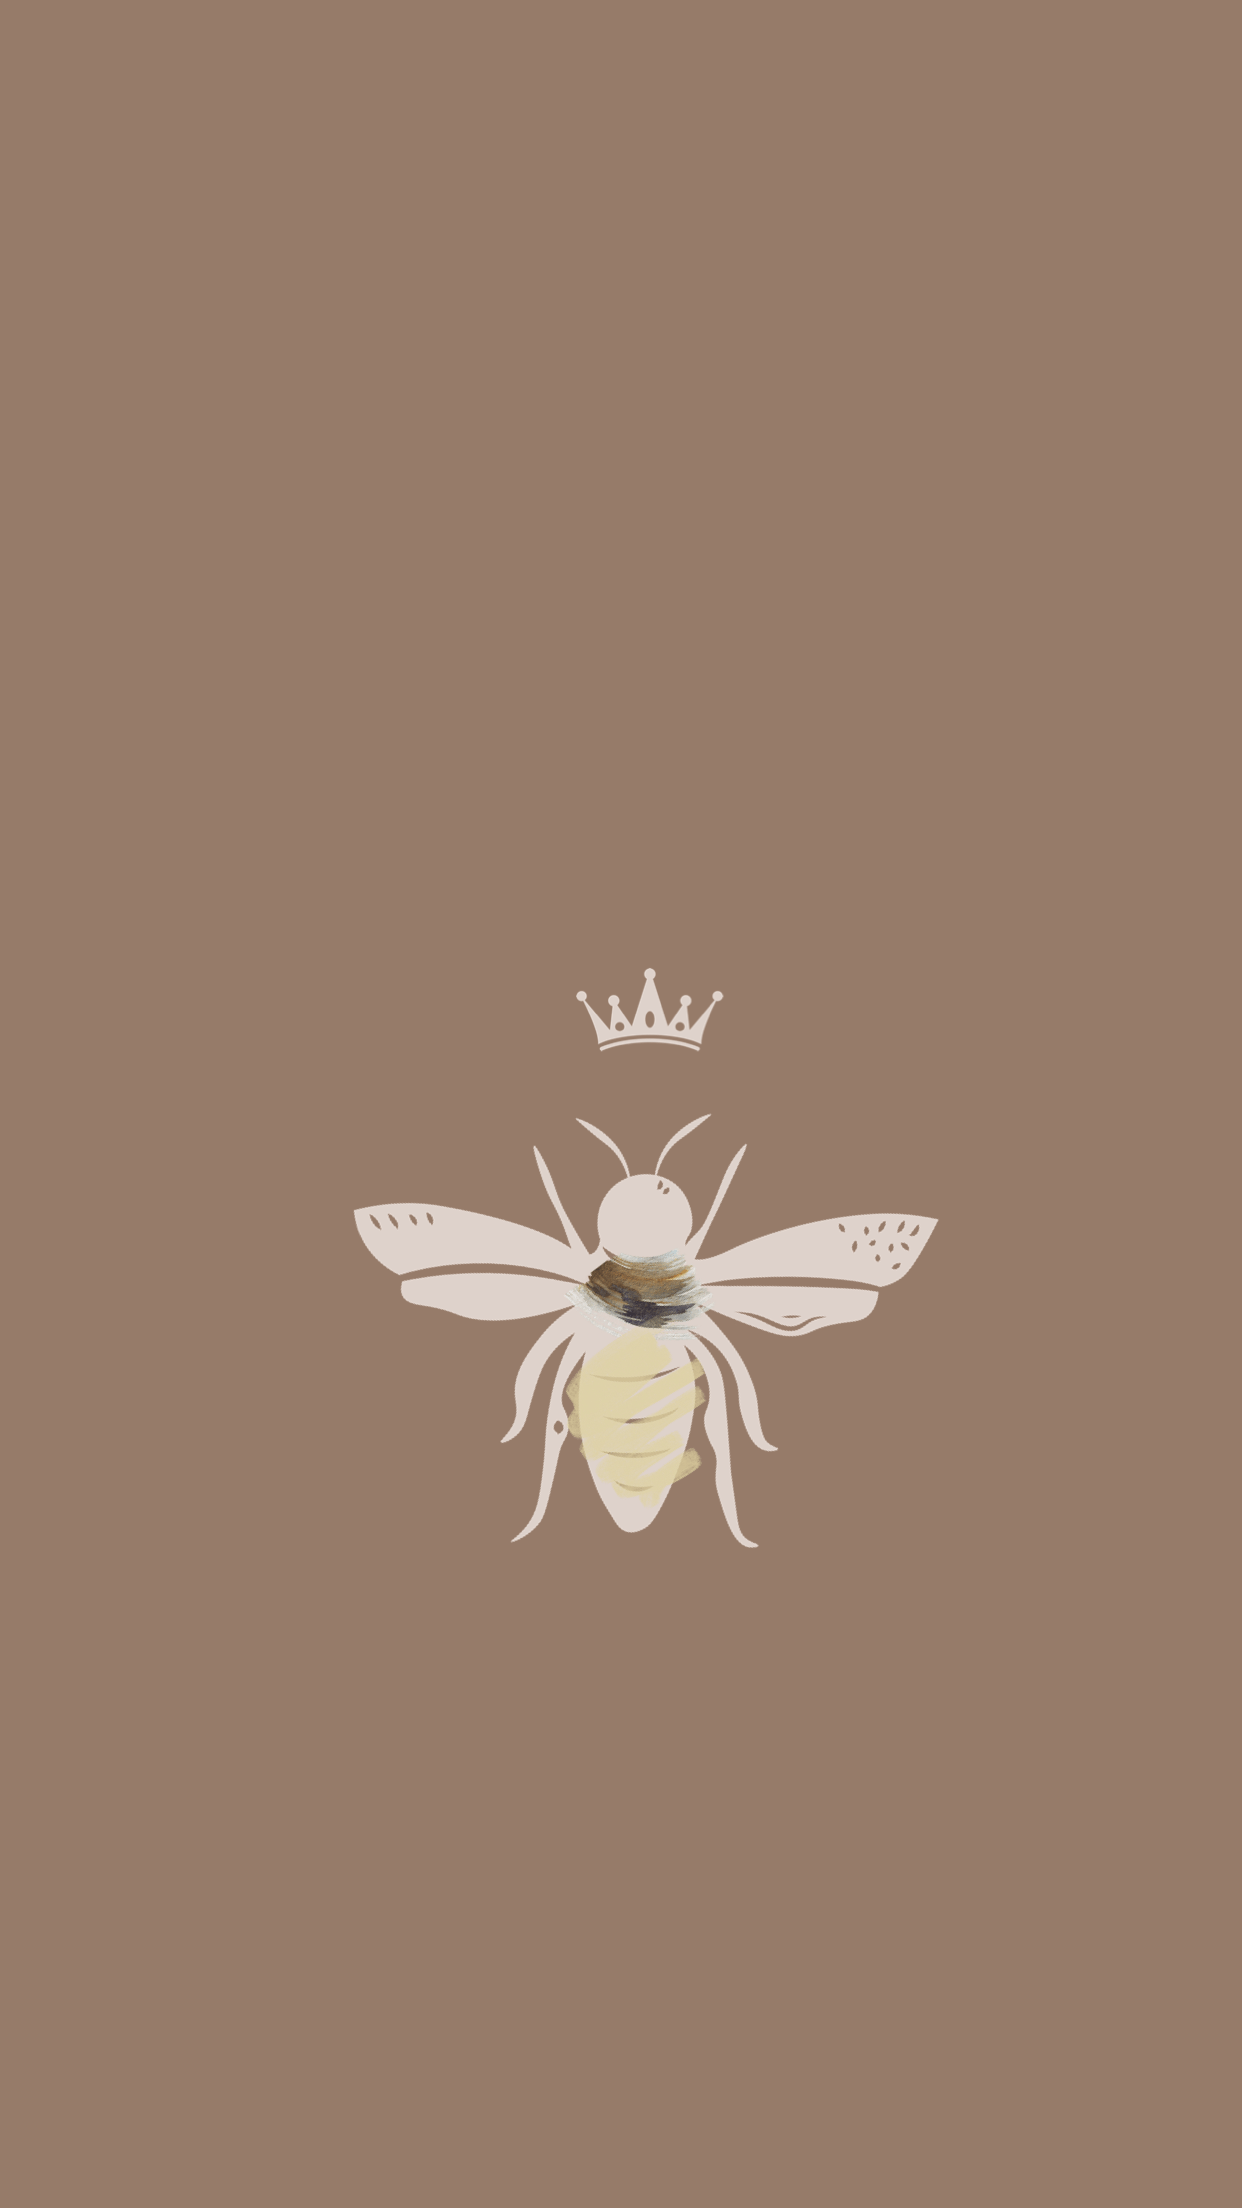 A bee with crown on its head - Bee